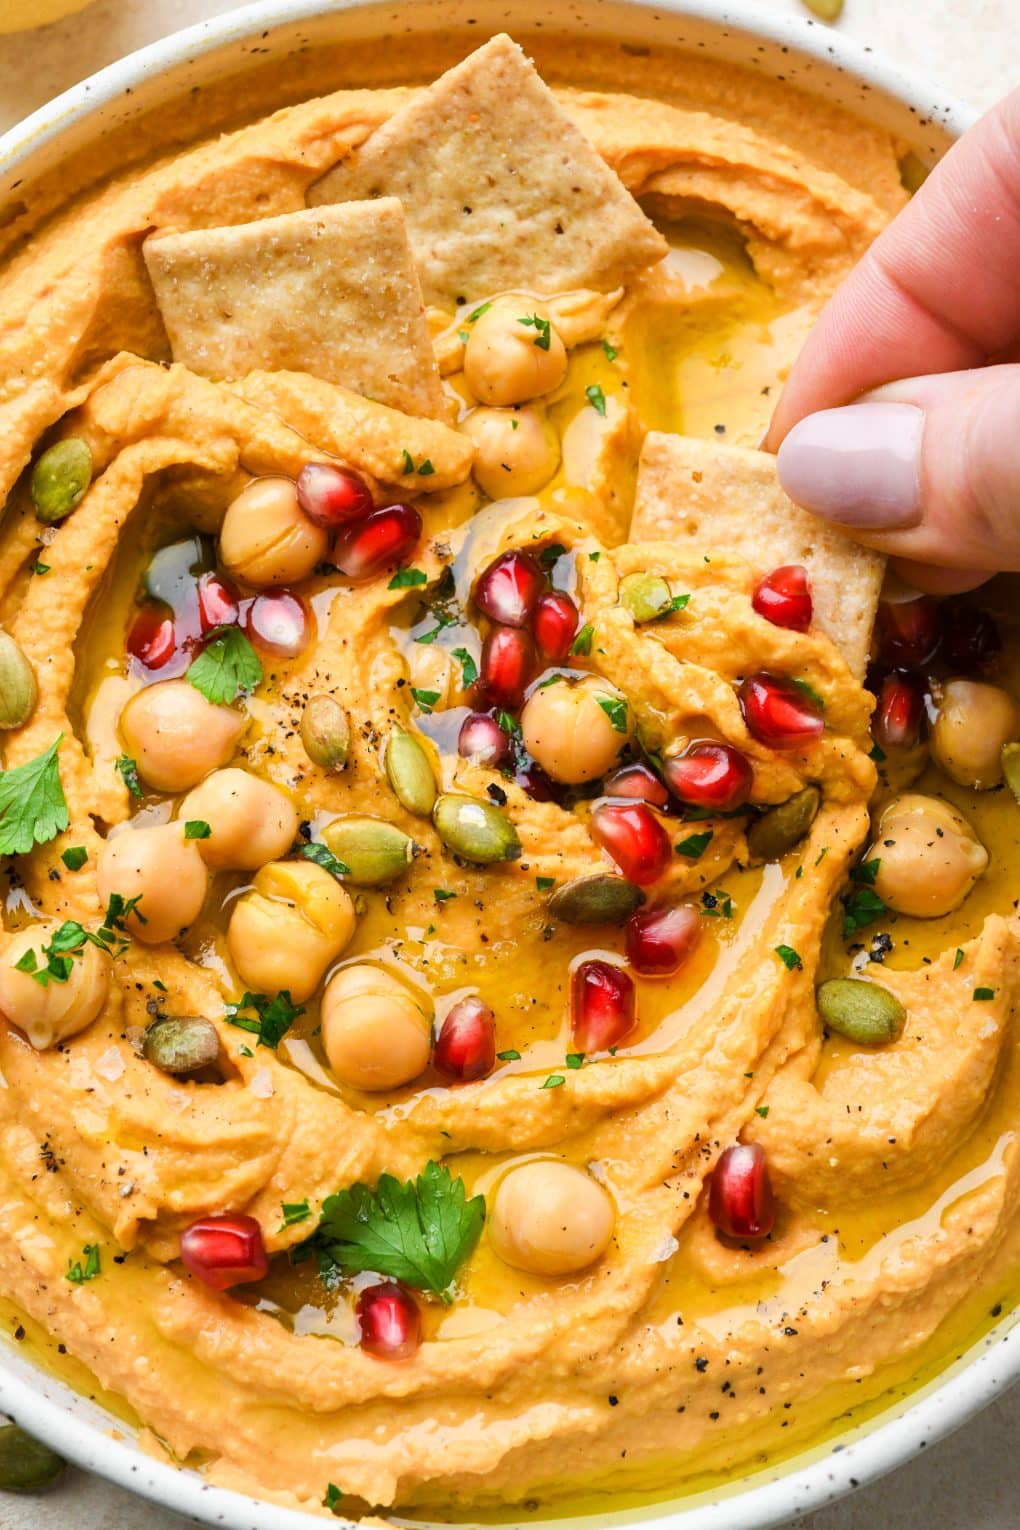 Close up image of a hand dipping a cracker into sweet potato hummus.